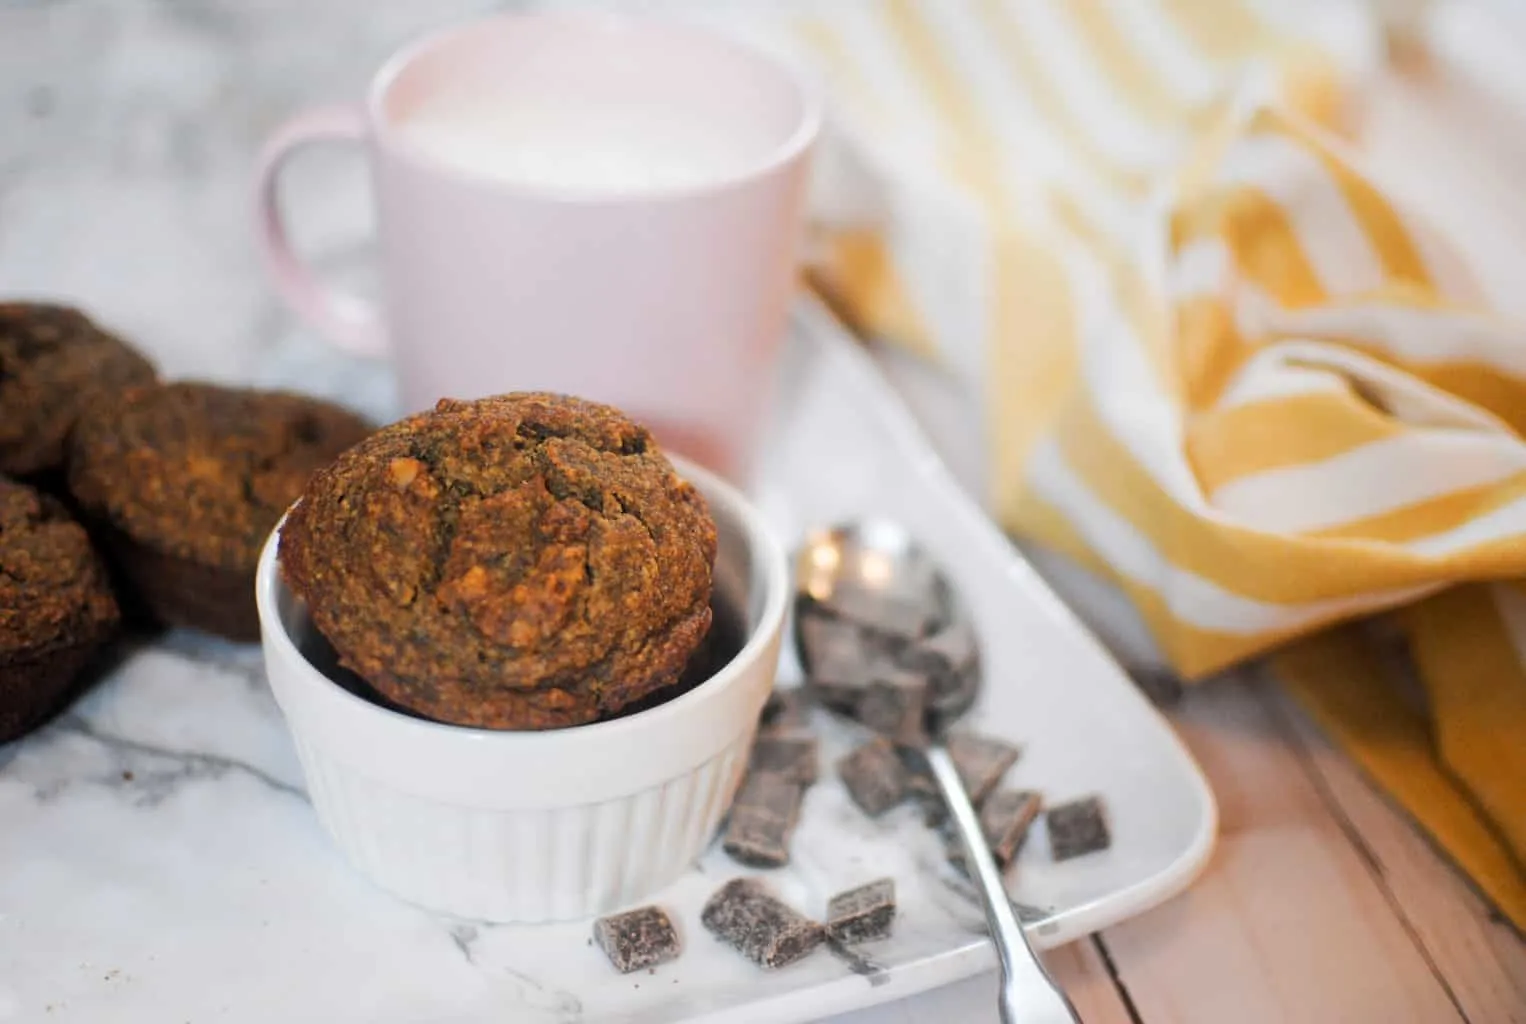 Gluten-free vegan banana chocolate chip muffin recipe: muffins in a bowl beside a pink cup of steamed milk and a spoonful of chocolate chunks